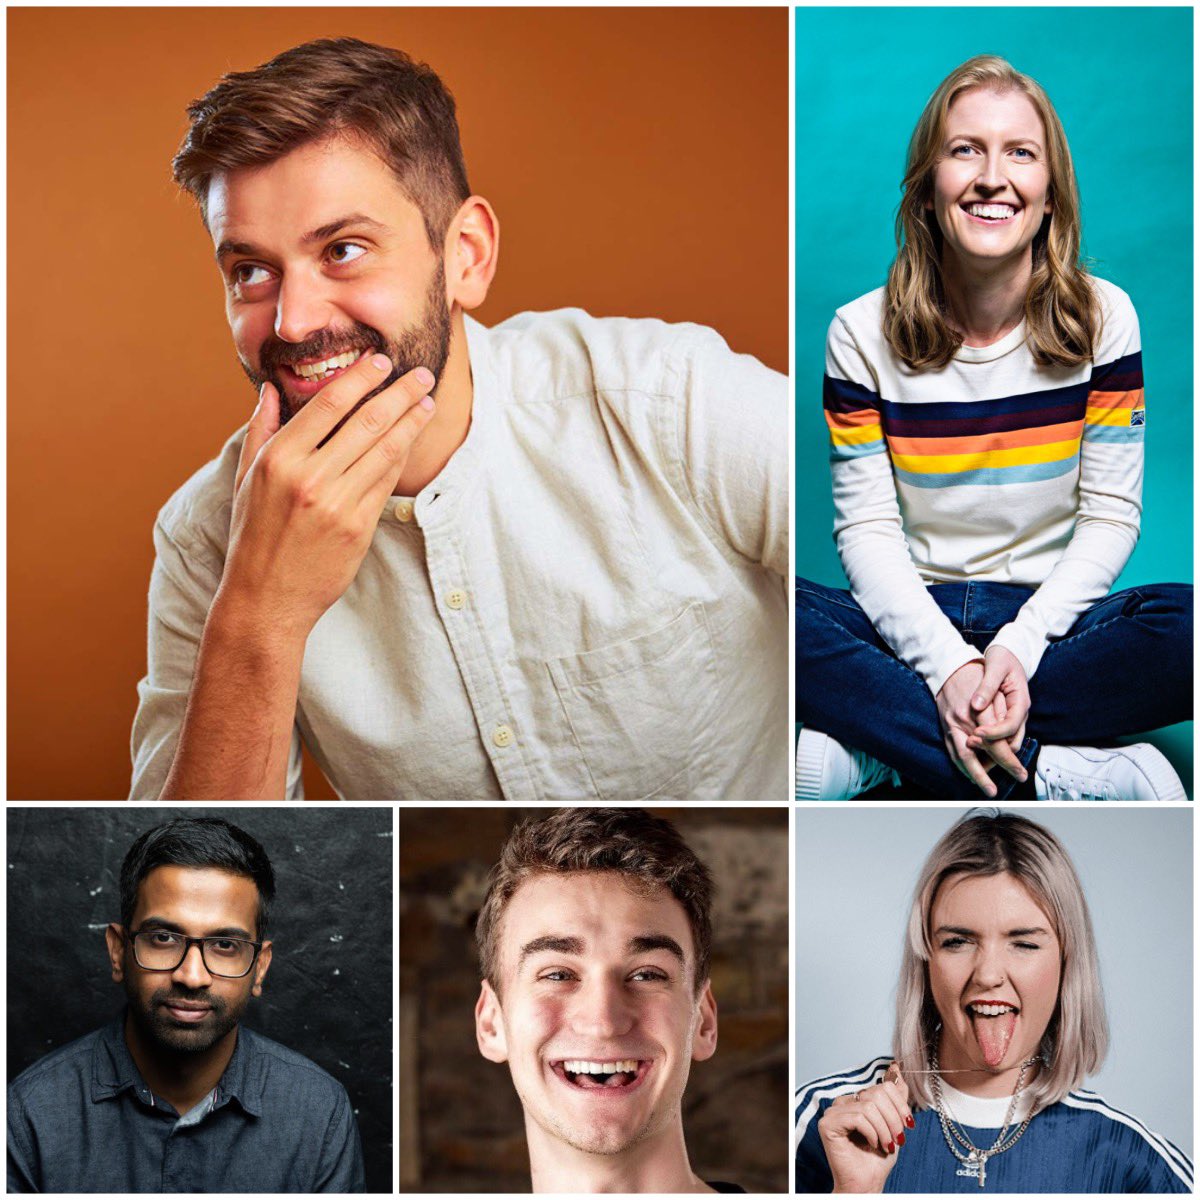 Yes yes yes! We’re back at @UTCComedyclub this Sunday with this bunch of beauts 👇 ⭐️ @FinTaylorcomedy ⭐️ @heidi_regan ⭐️ @official_sam_c ⭐️ @joshuabethania ⭐️ @MissAHaddow 🗓️ Sunday 26 Feb 🎟️🔗 sundayspecial.co.uk